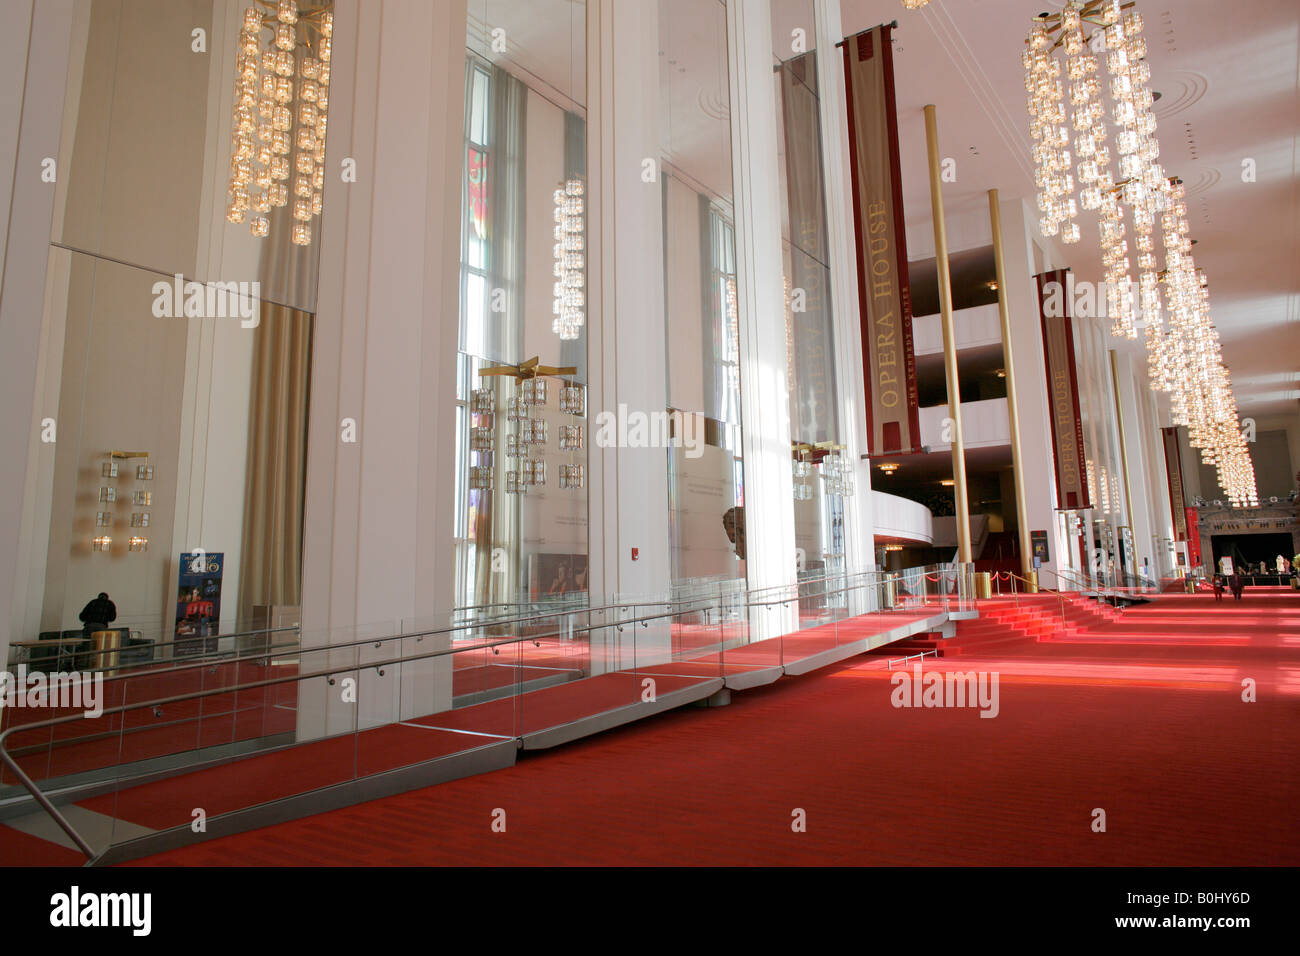 Le John F. Kennedy Center for the Performing Arts, Washington DC, USA Banque D'Images